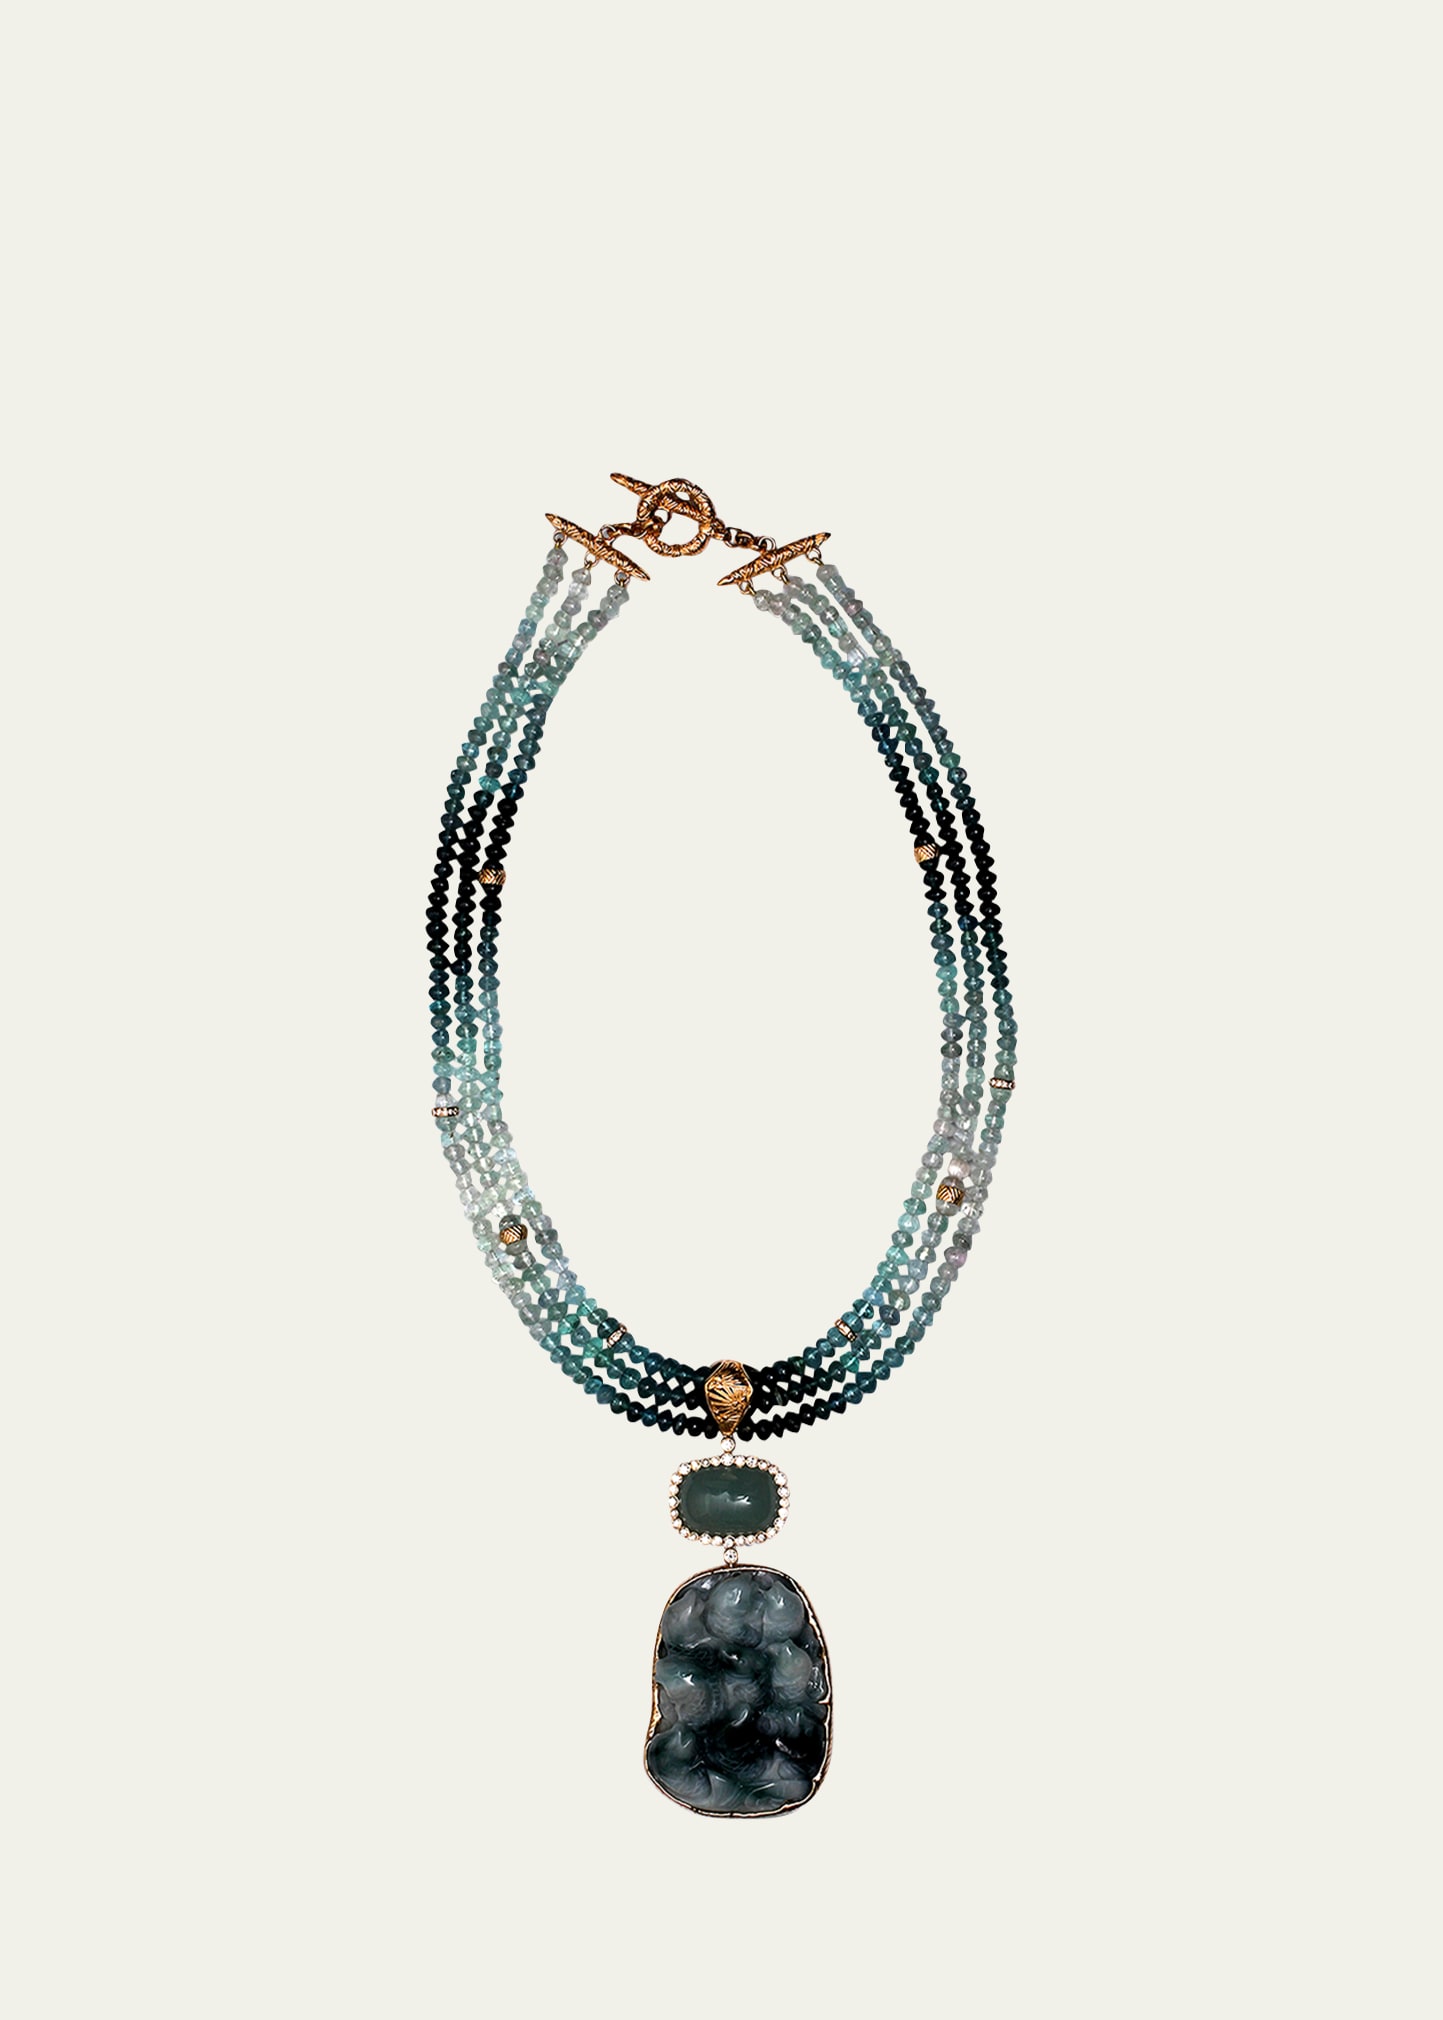 Stephen Dweck 18k Gold Vintage Hand-carved Pendant 3-strand Necklace With Jade, Aquamarine, Tourmaline, And Diamon In Vintage Hand Carv